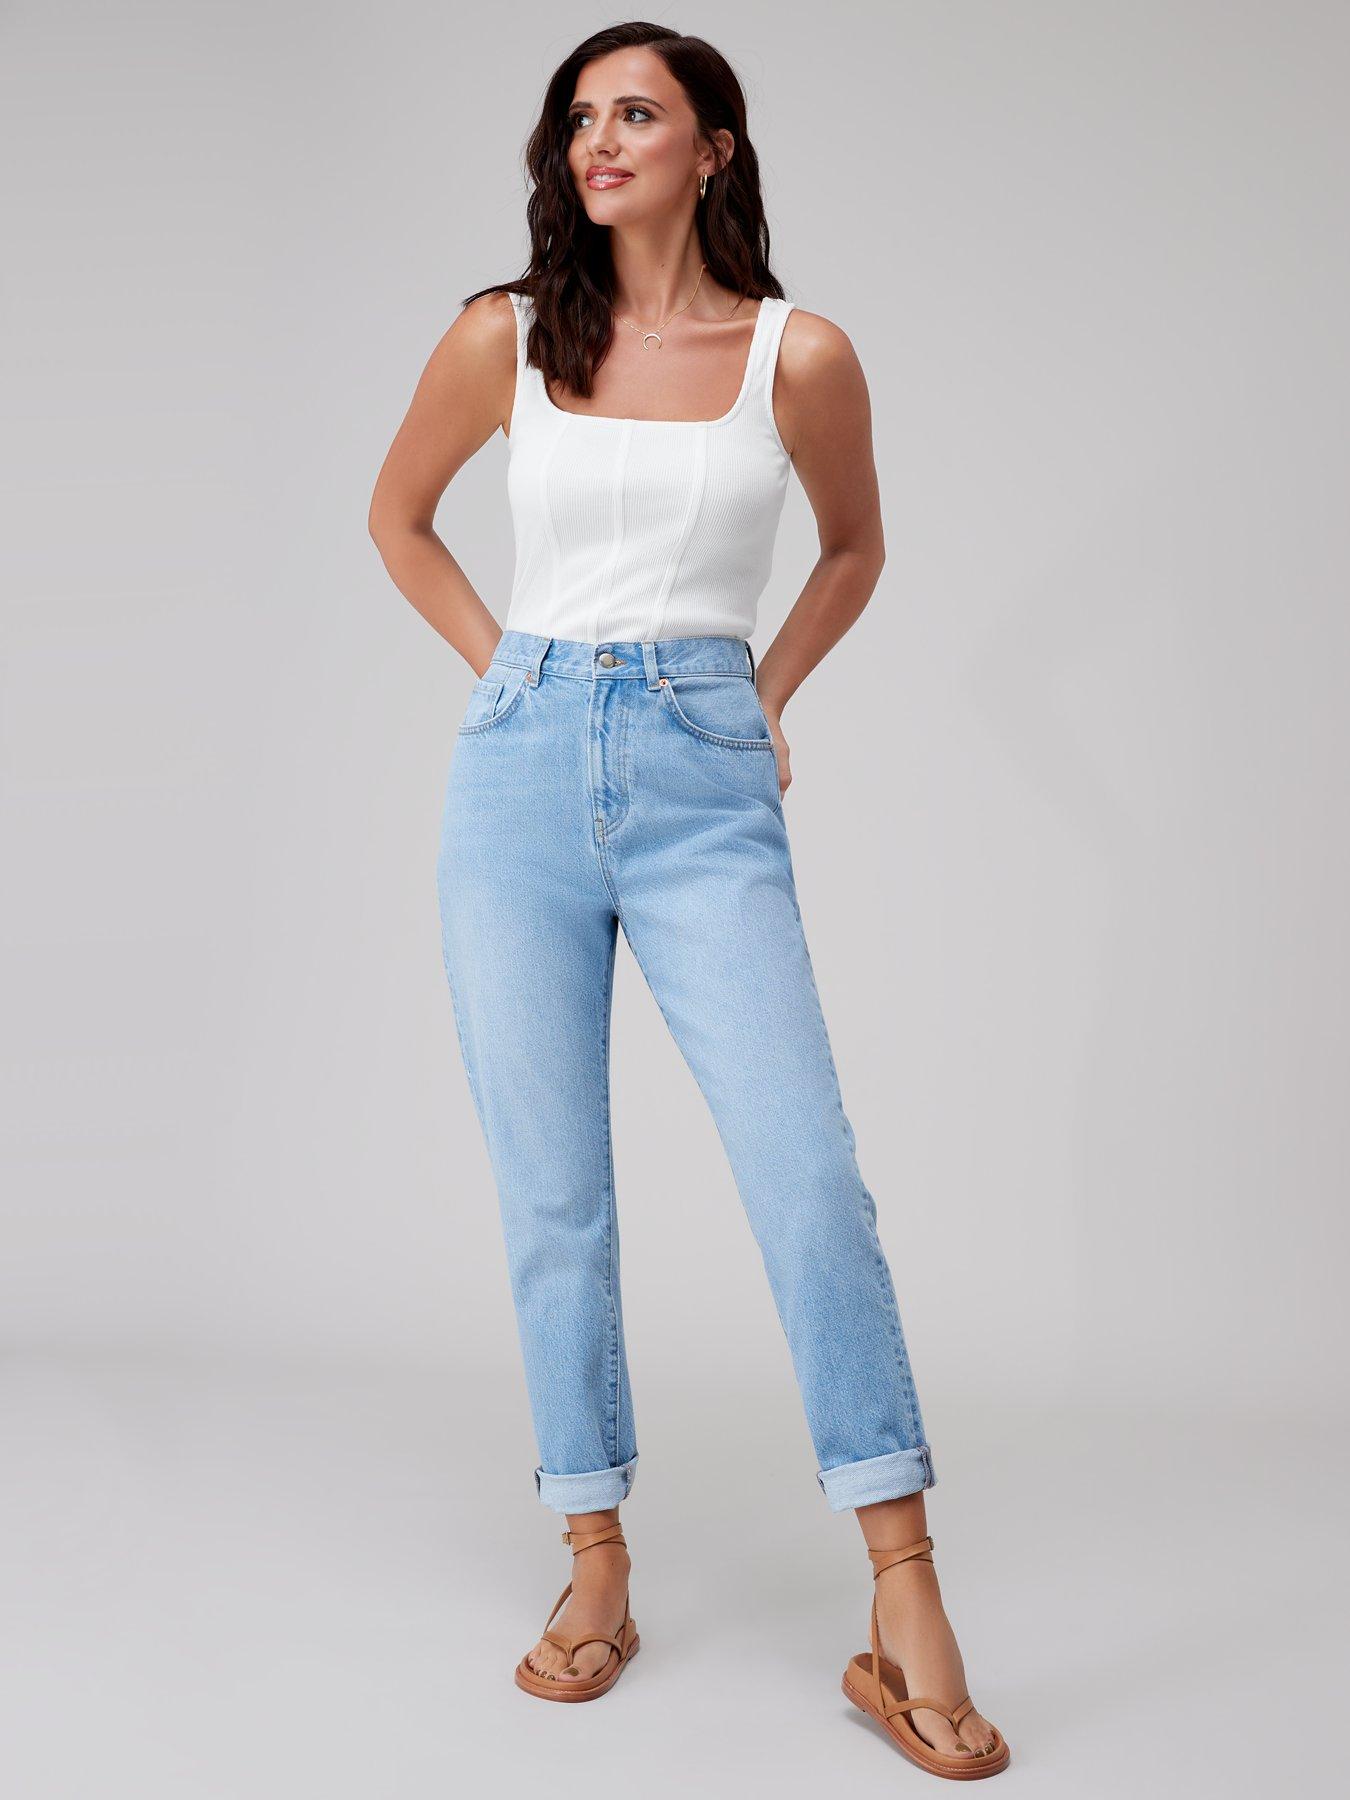 Jeans | Shop Denim Jeans for UK | Very.co.uk